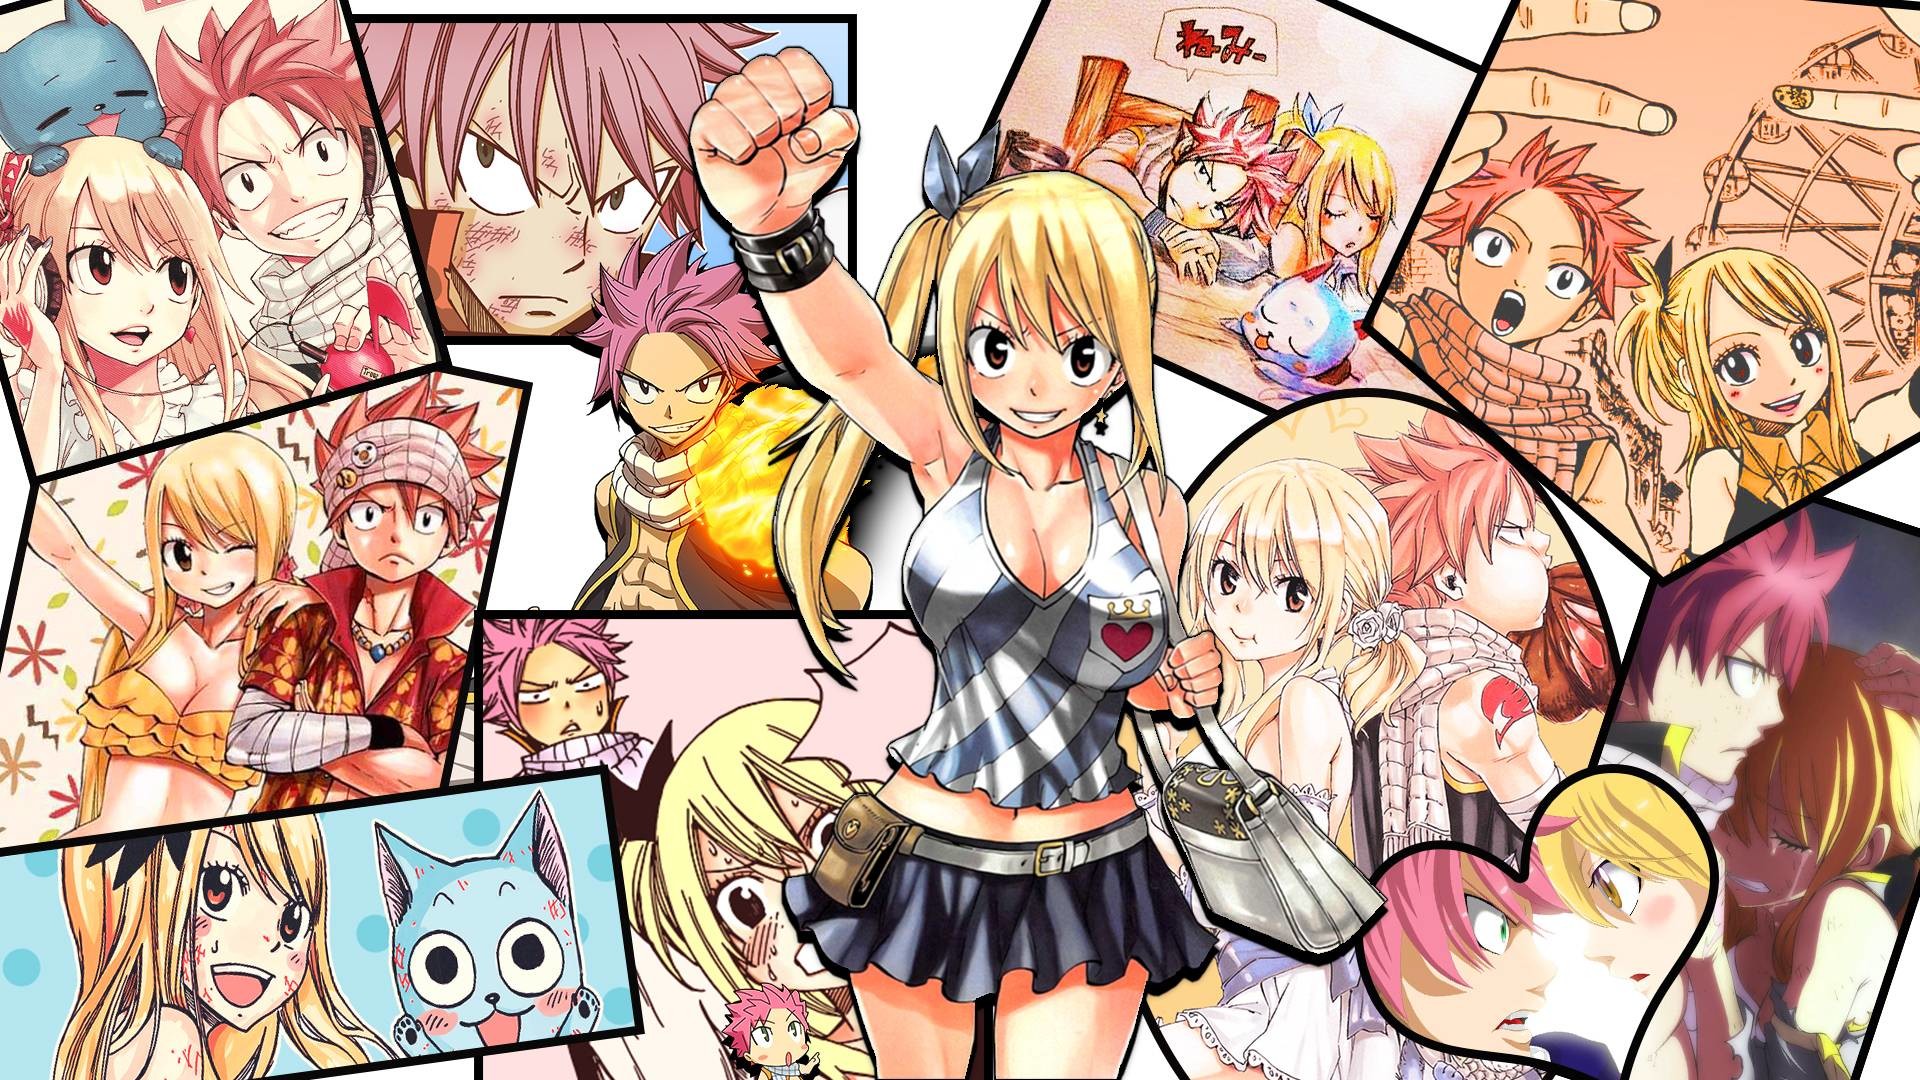 1920x1080 Media] Just wanted to share my NALU wallpaper (1920 x 1080) Need .